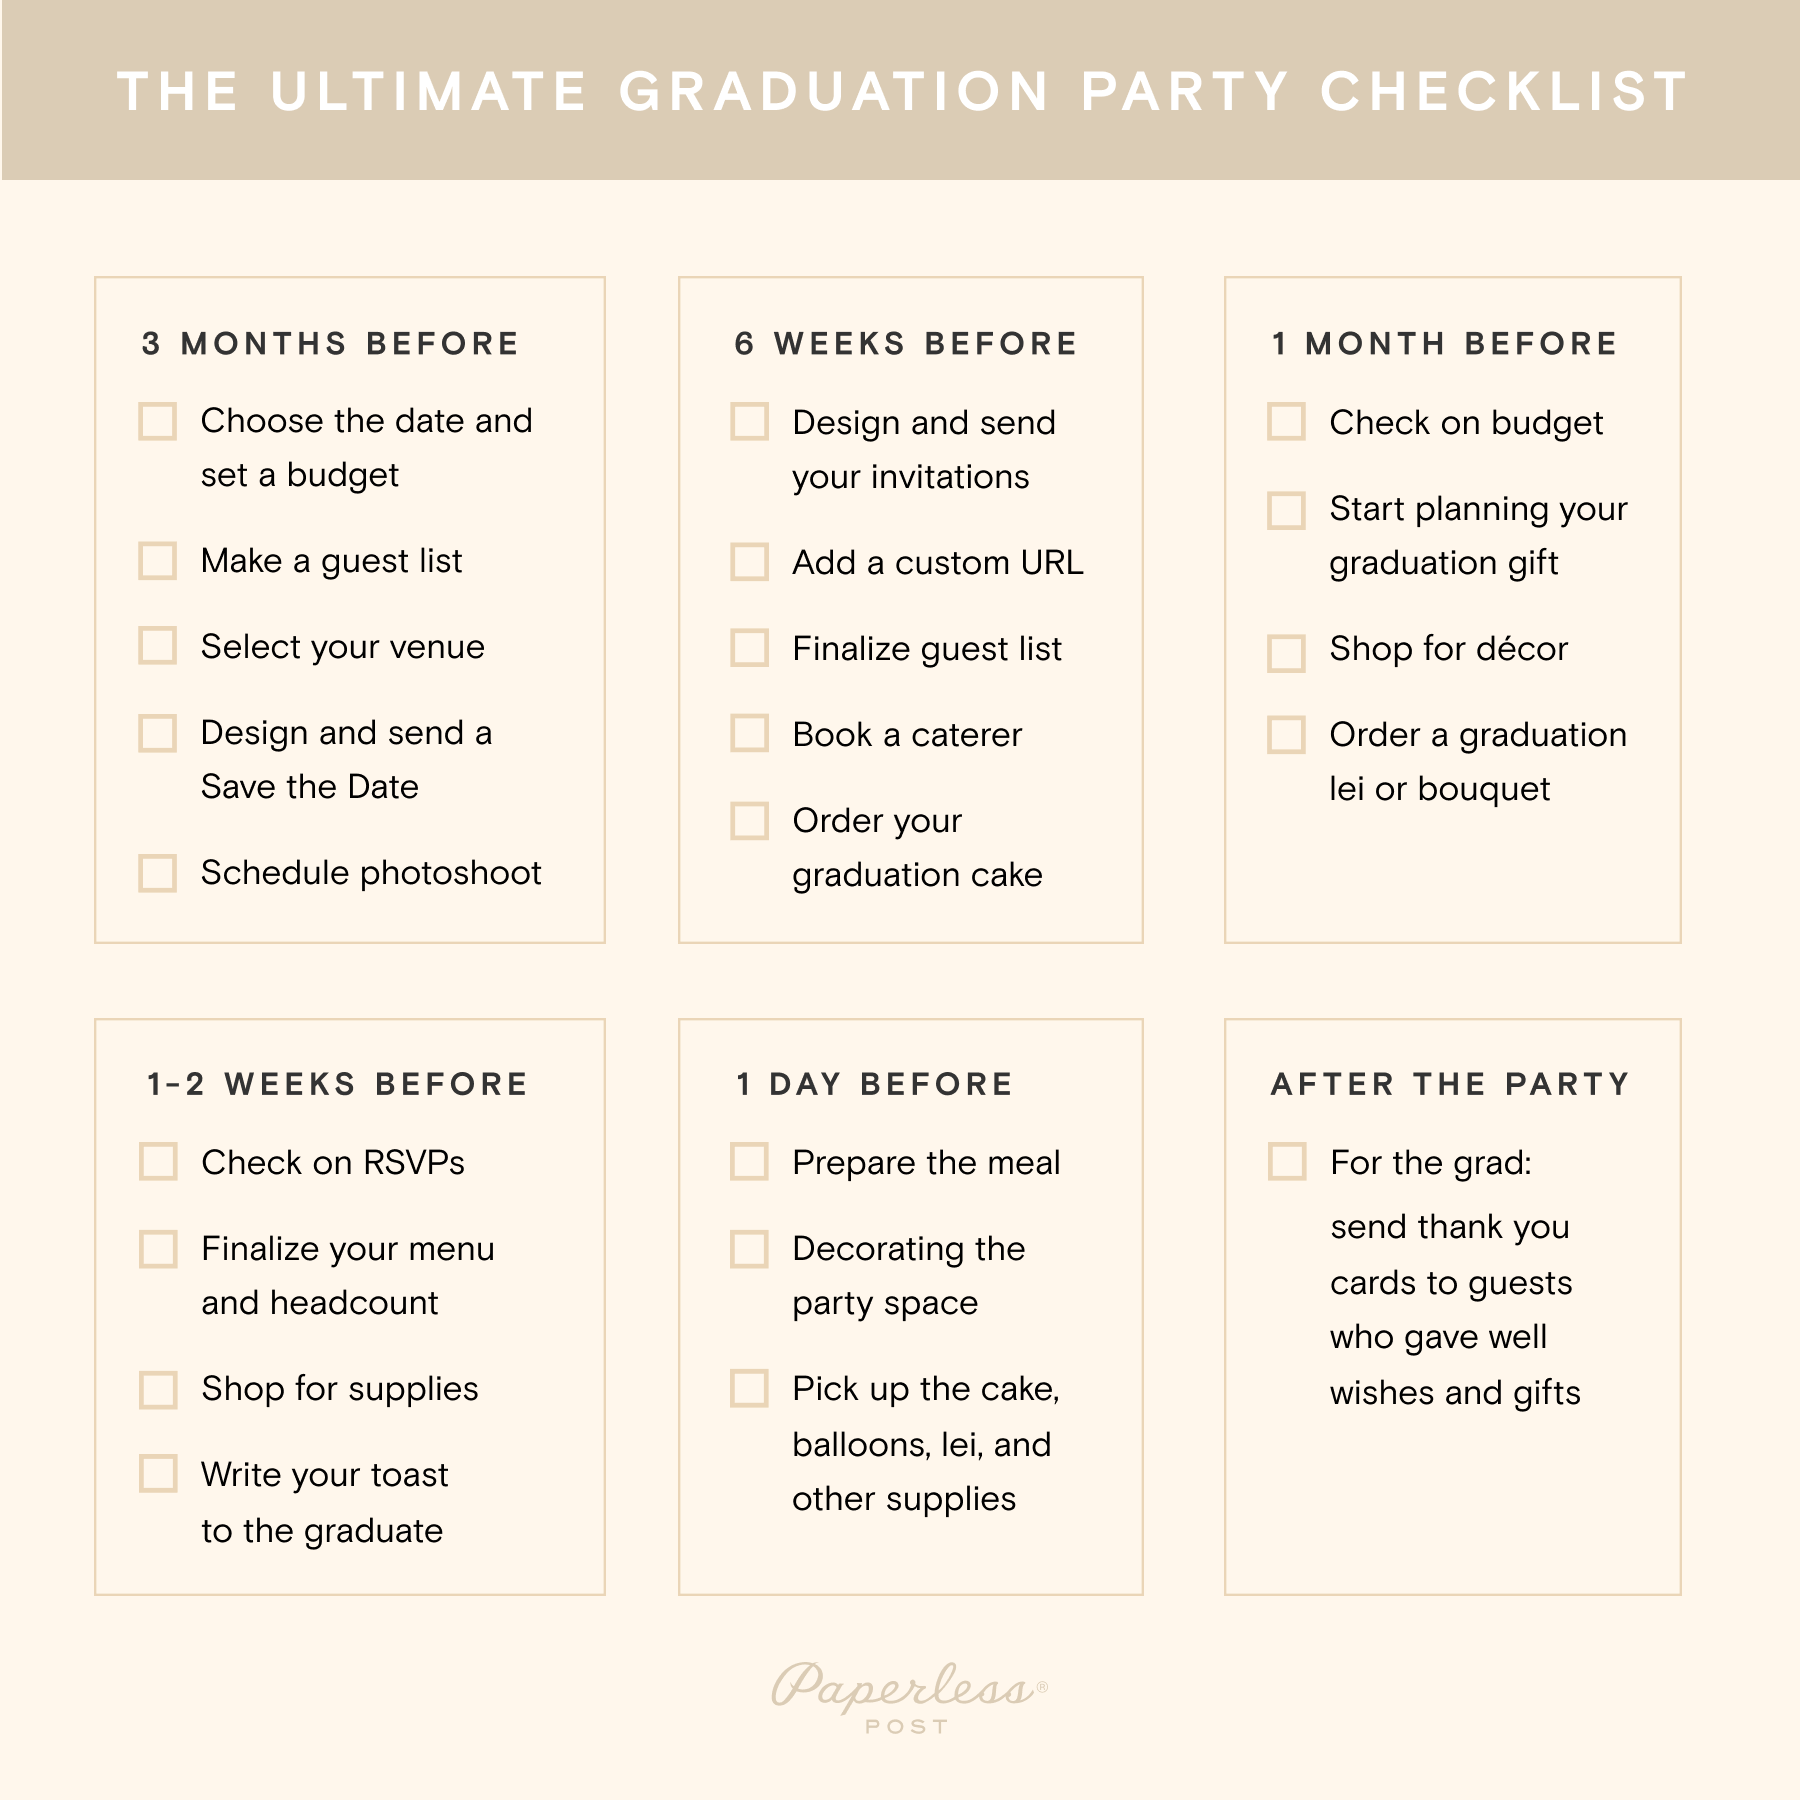 A checklist explains the steps of preparing for a graduation party, as outlined in this article.